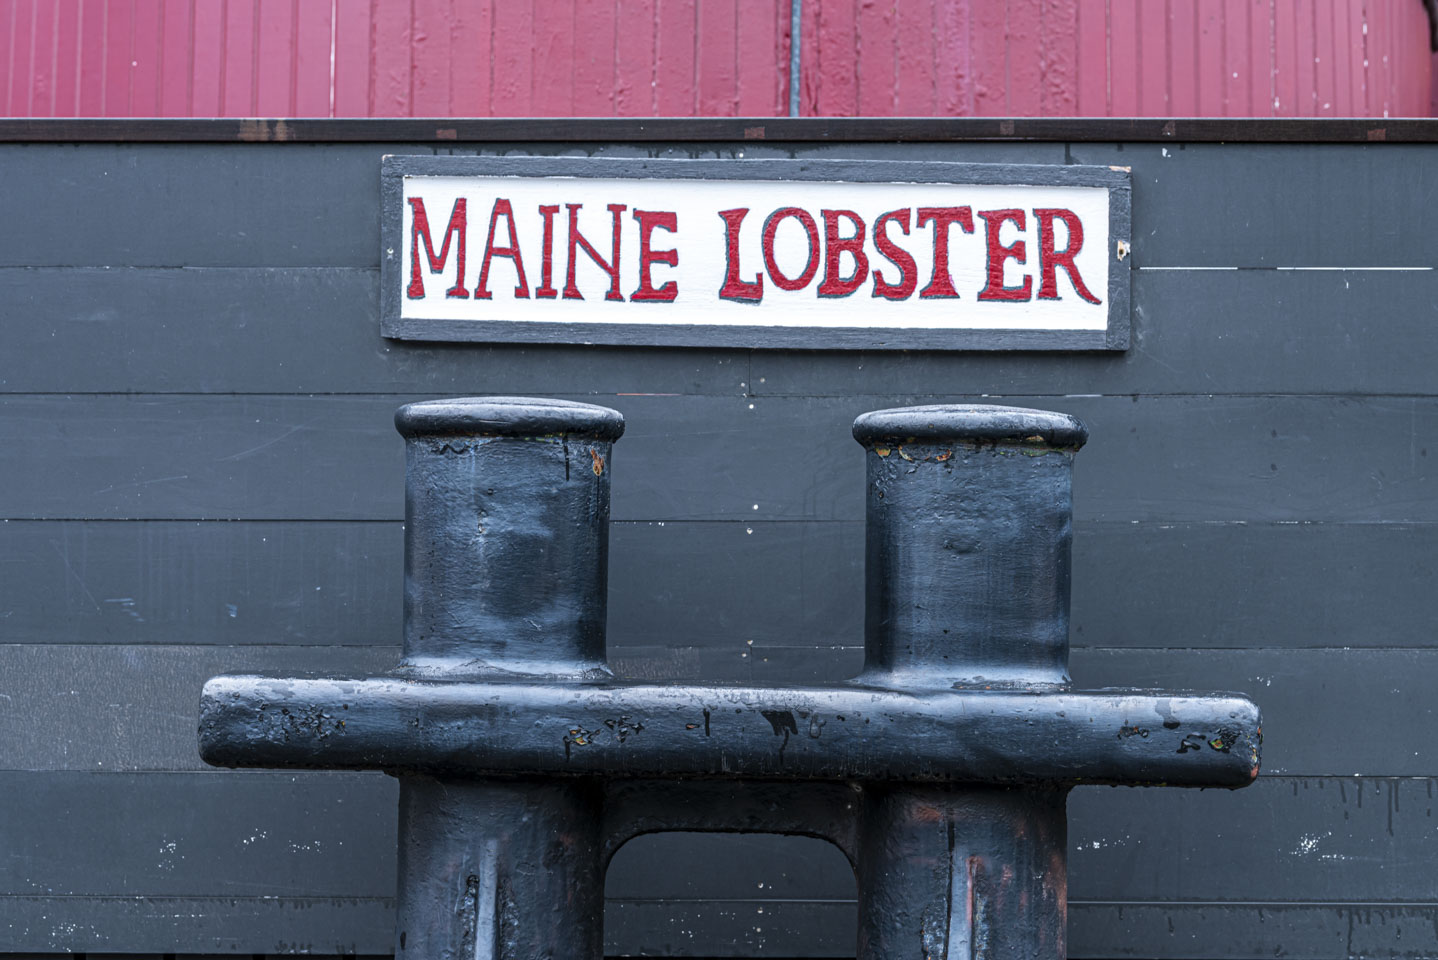 A sign for Maine Lobster